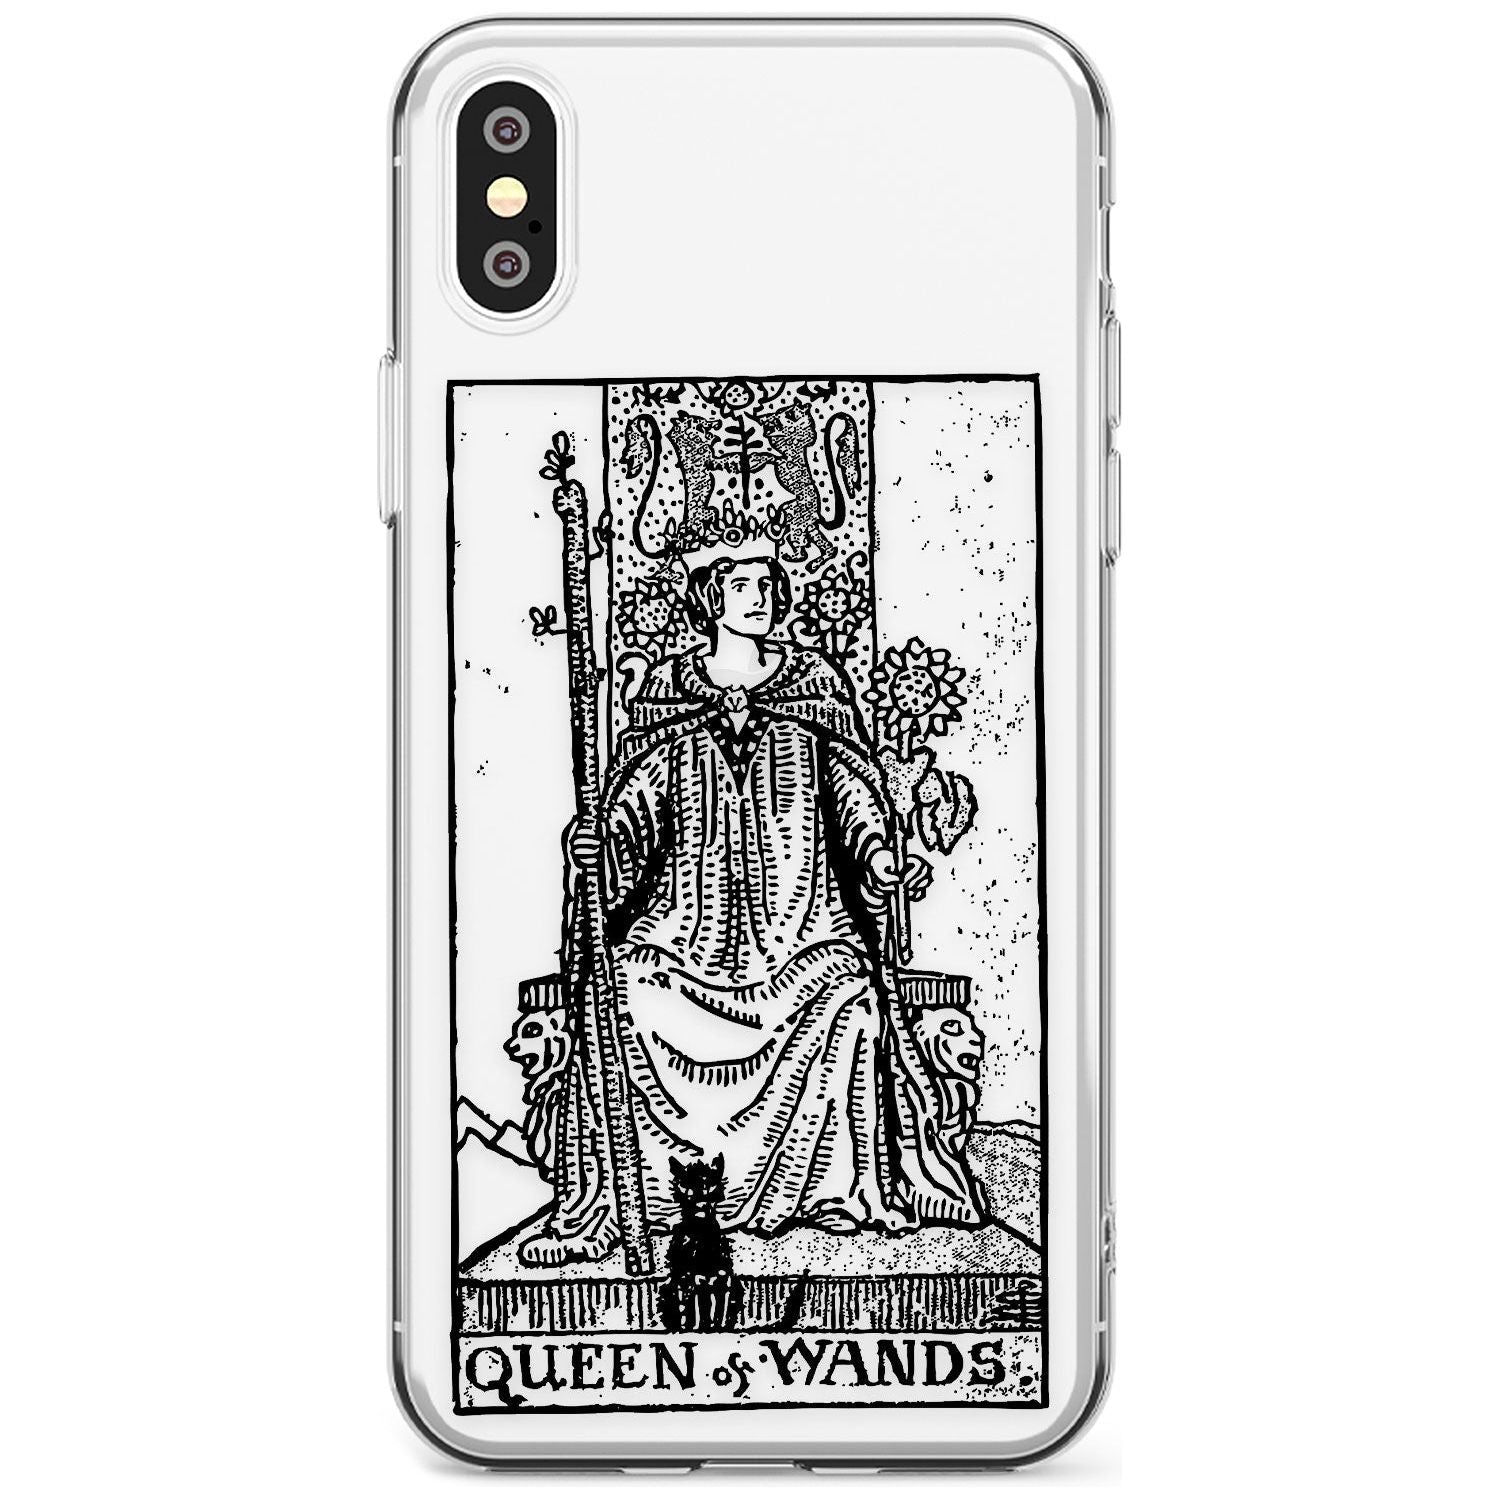 Queen of Wands Tarot Card - Transparent Black Impact Phone Case for iPhone X XS Max XR